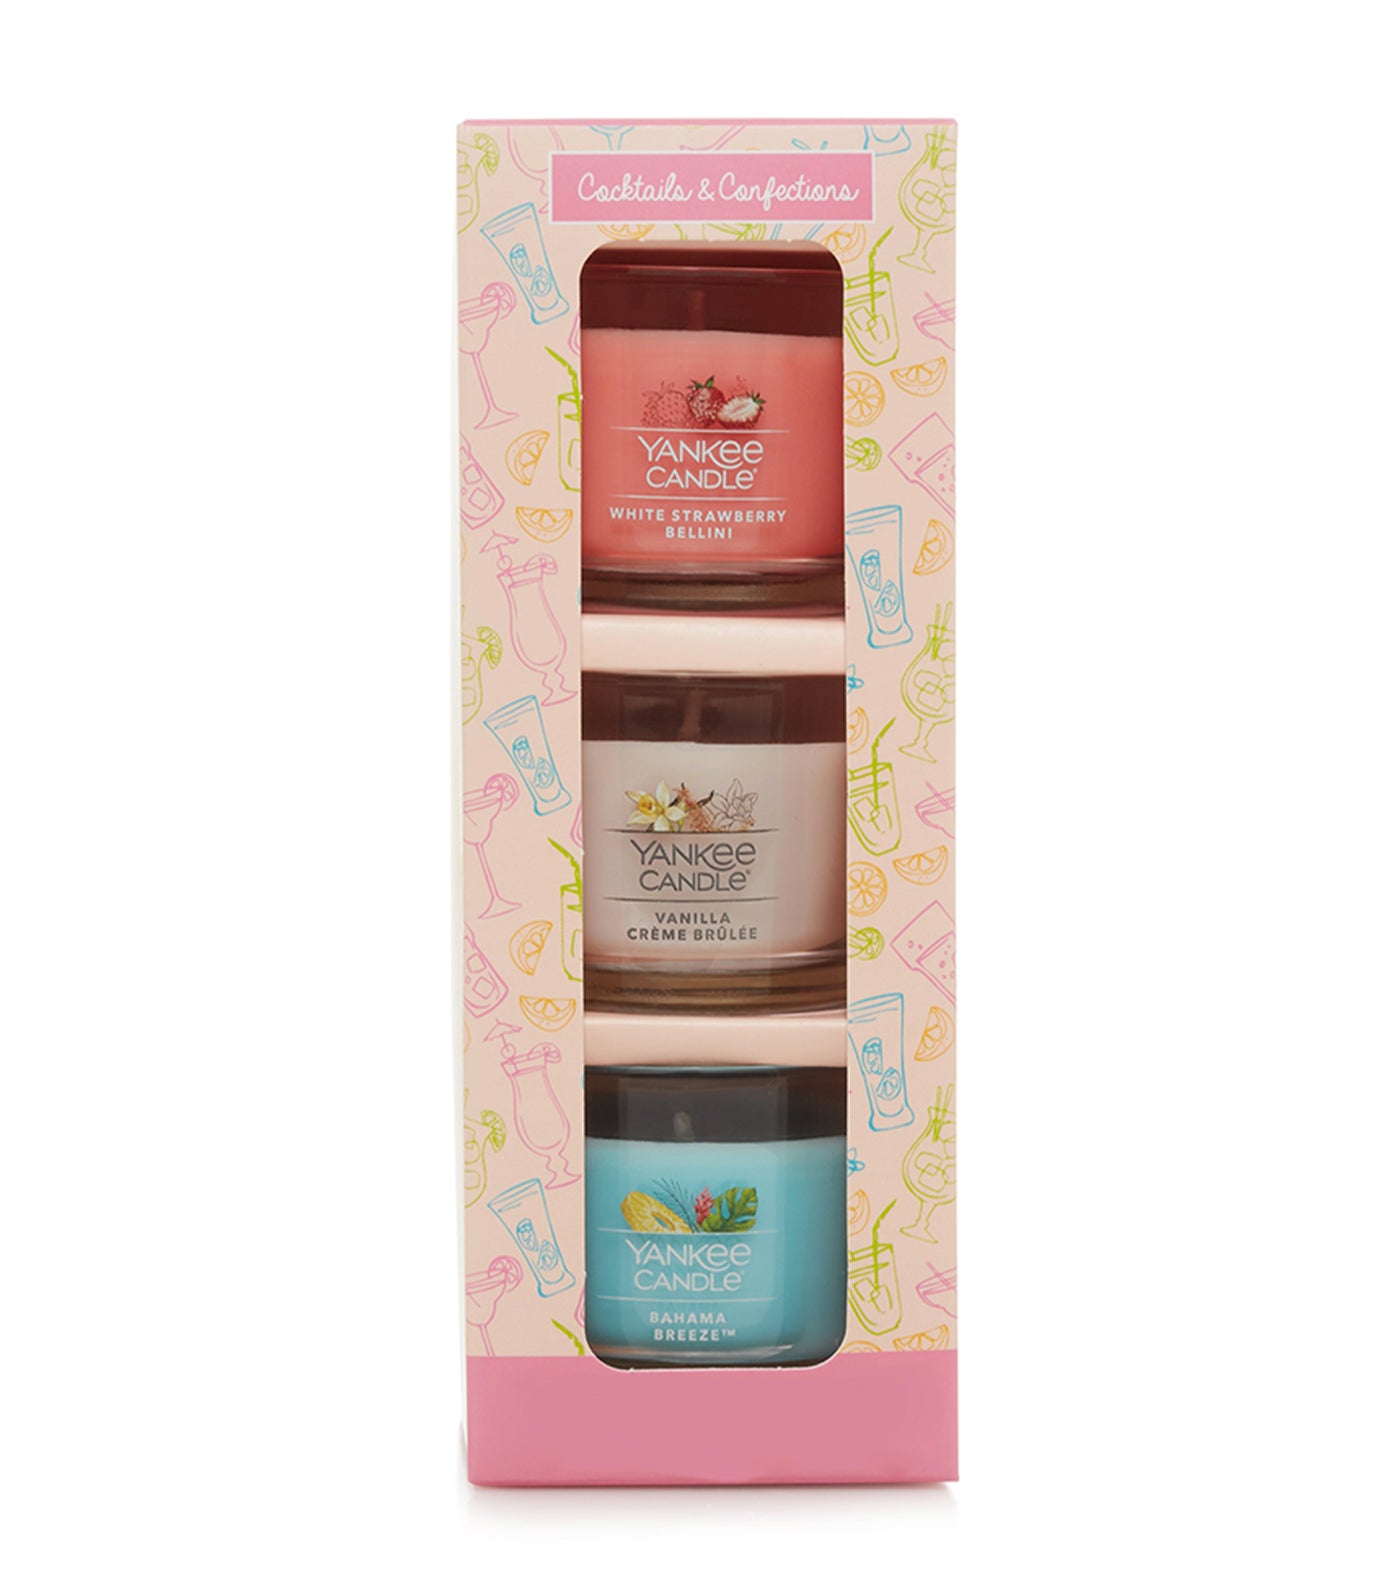 Yankee Candle 3-Pack Mini Cocktails & Confection Set